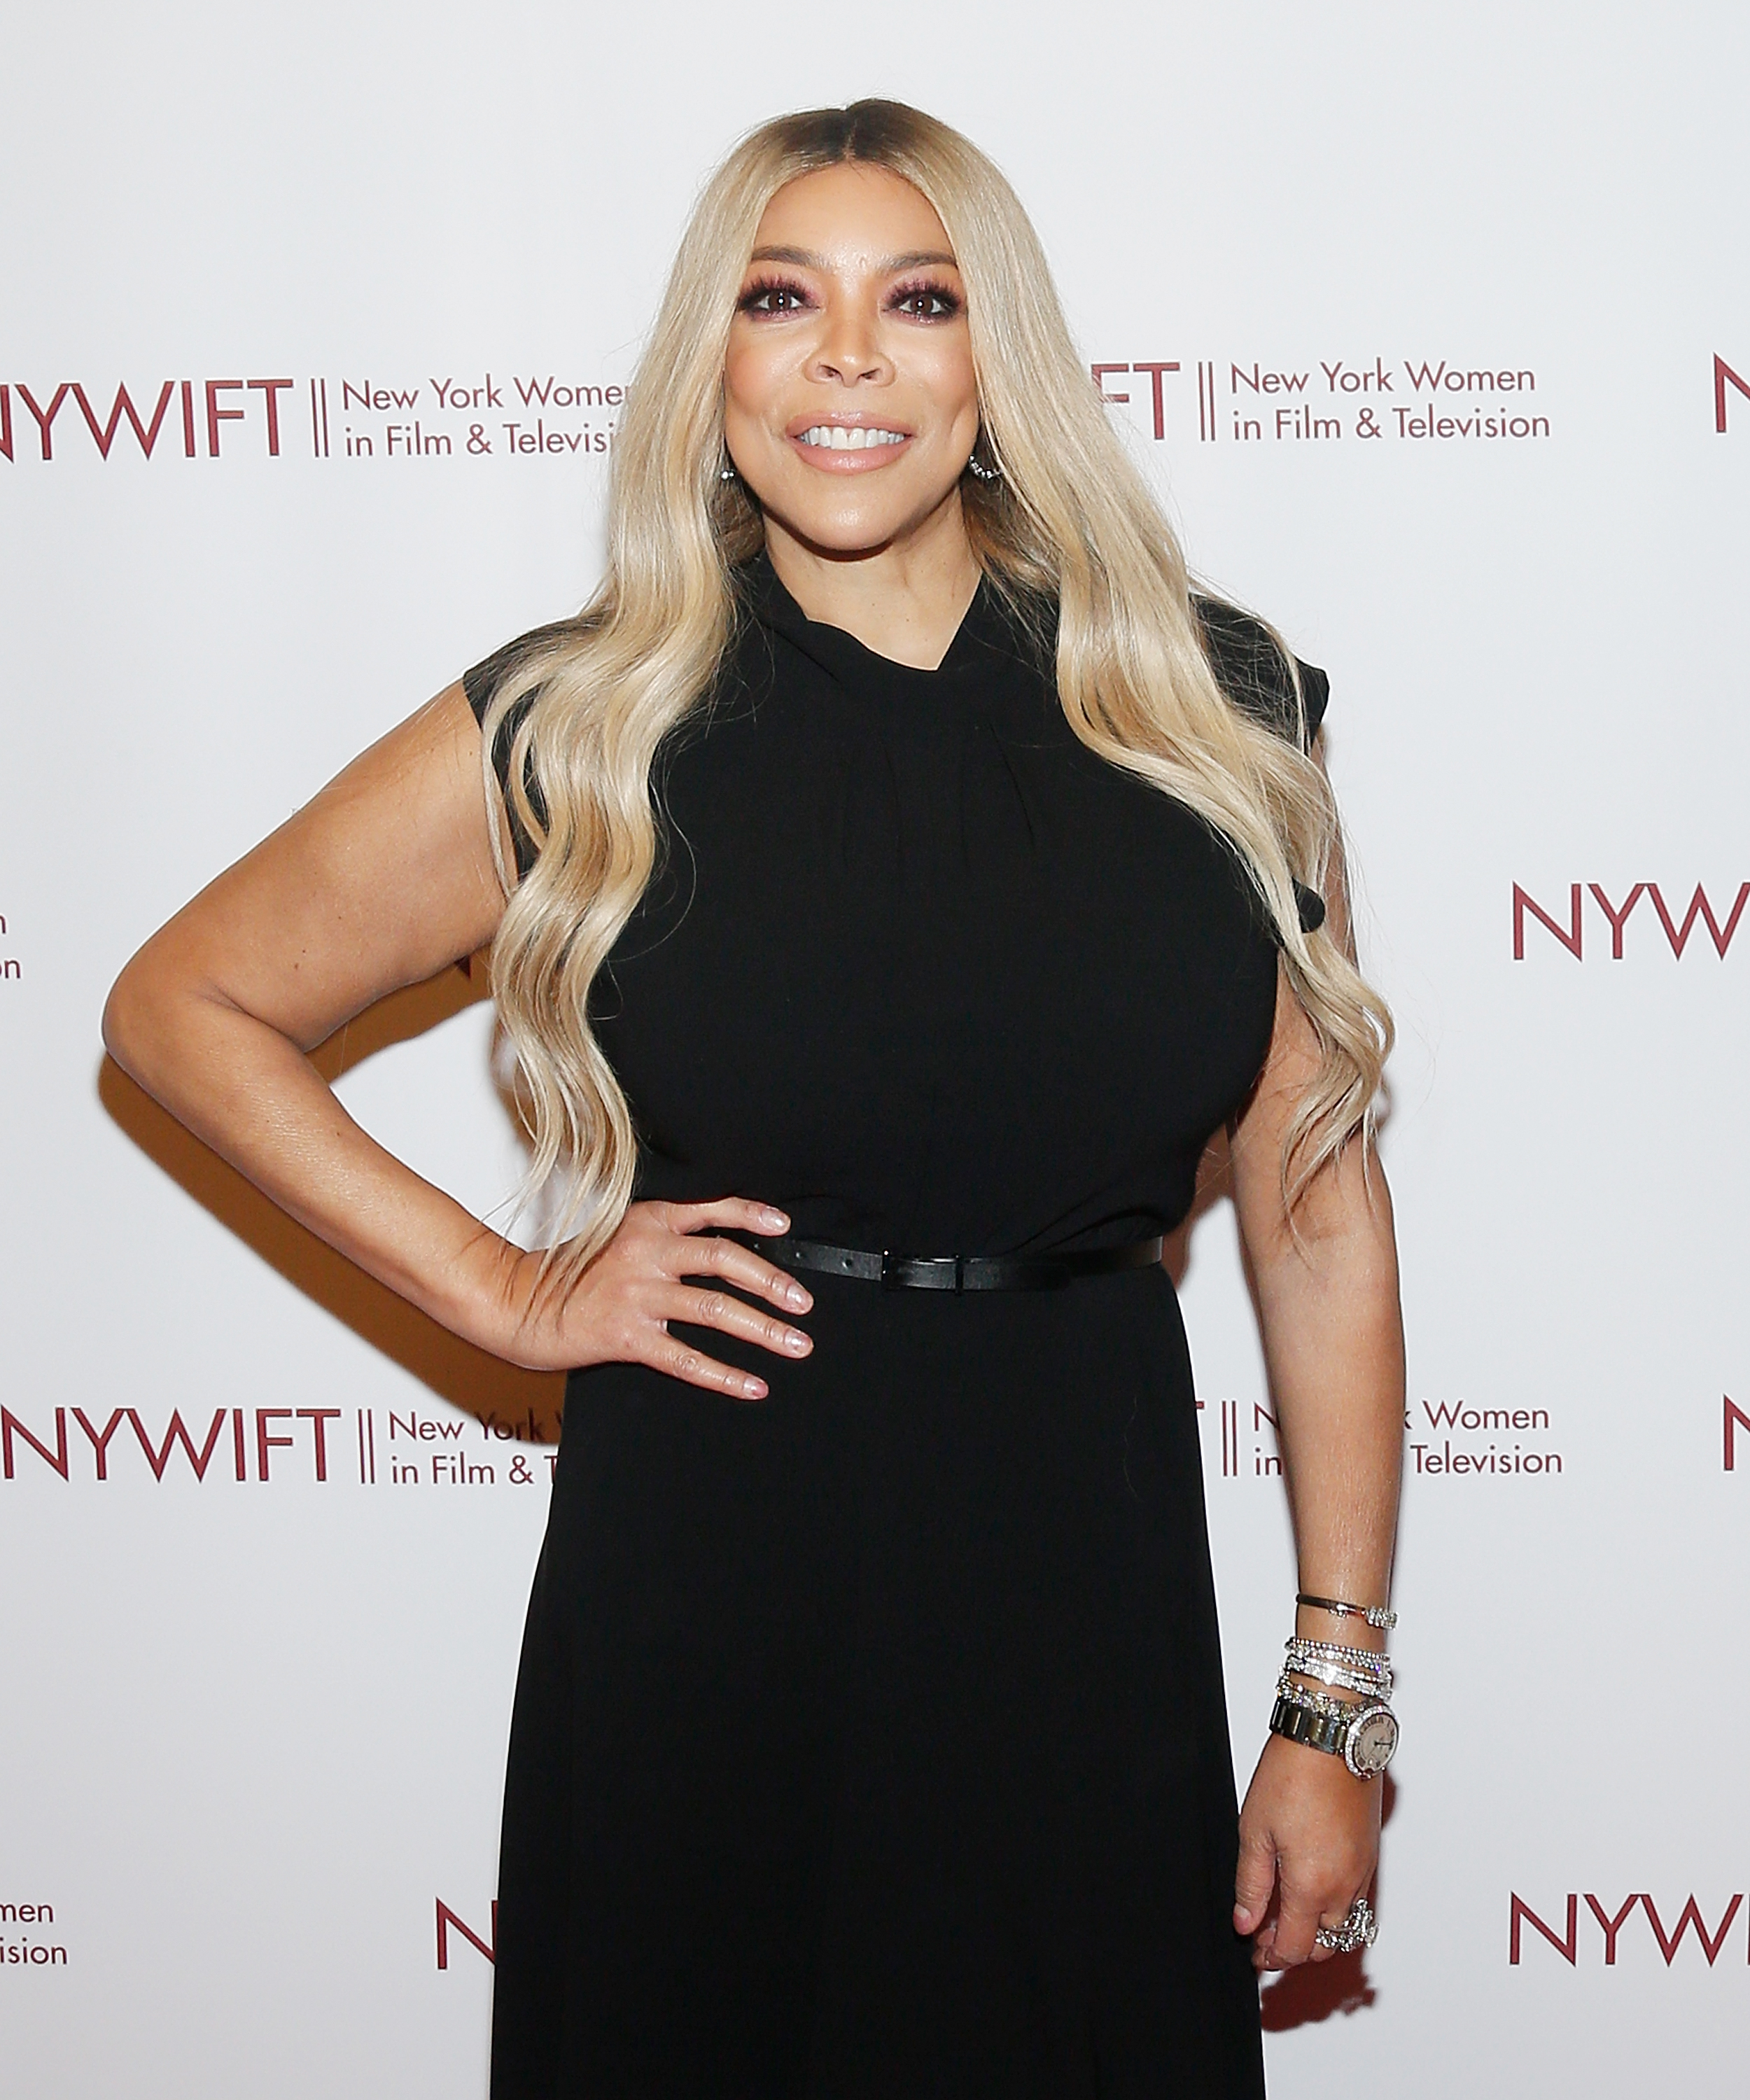 Wendy Williams at the NYWIFT Muse Awards in New York City on December 10, 2019 | Source: Getty Images